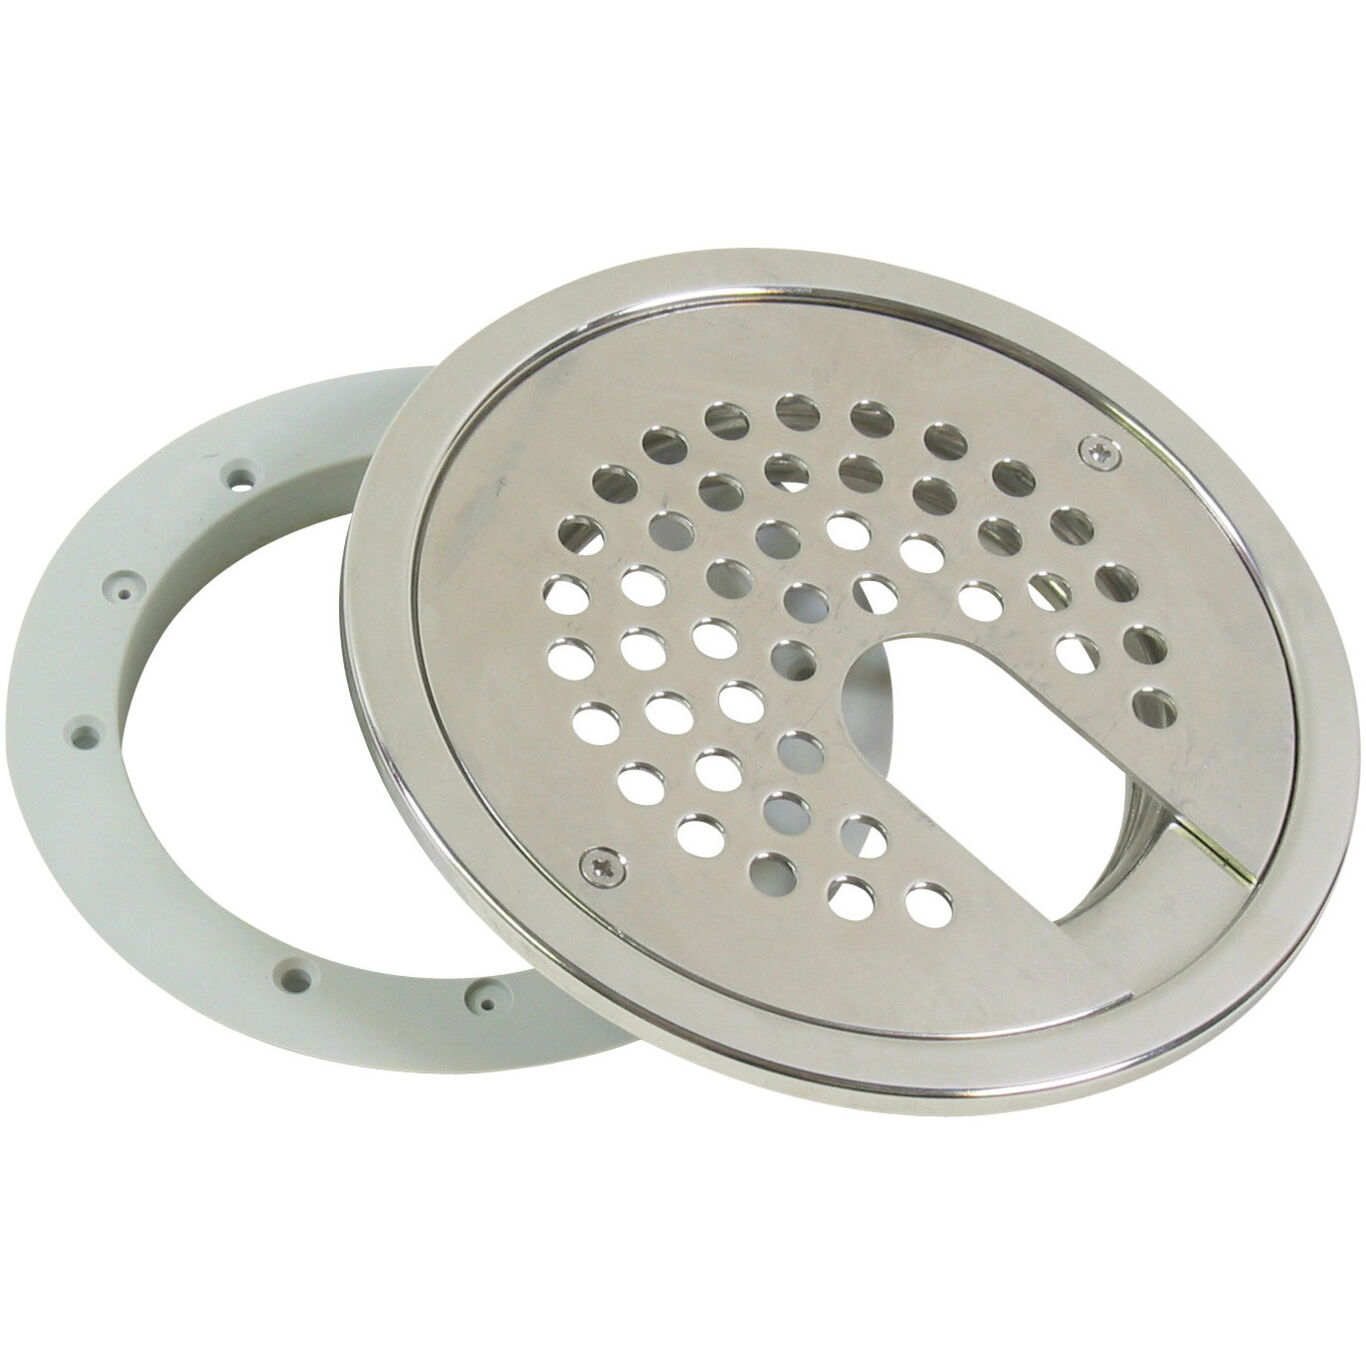 Product Image - Grating-Upper part-180